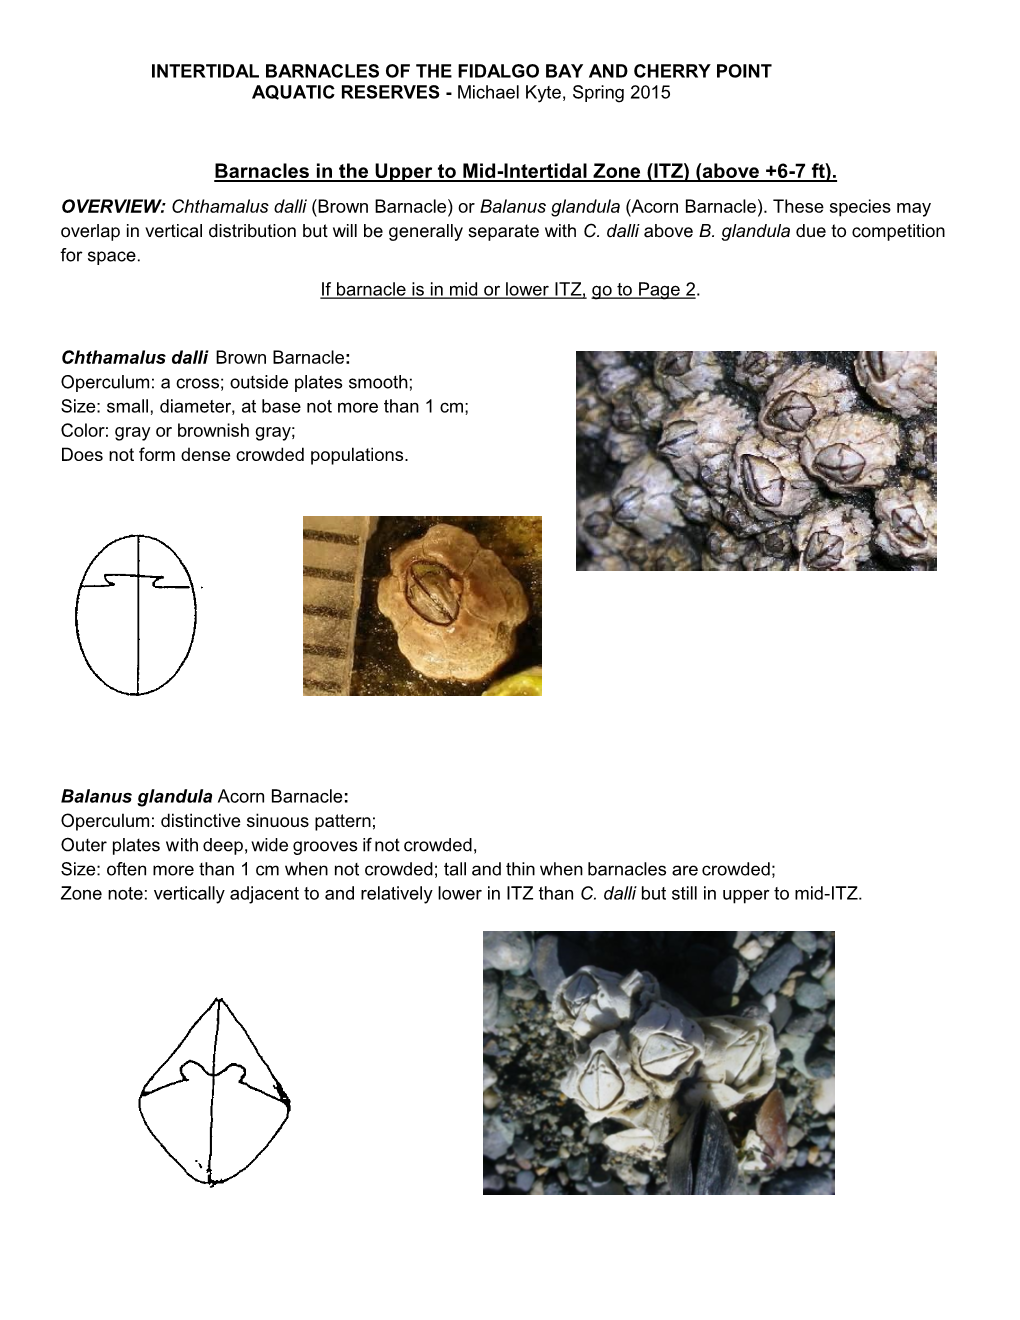 INTERTIDAL BARNACLES of the FIDALGO BAY and CHERRY POINT AQUATIC RESERVES - Michael Kyte, Spring 2015